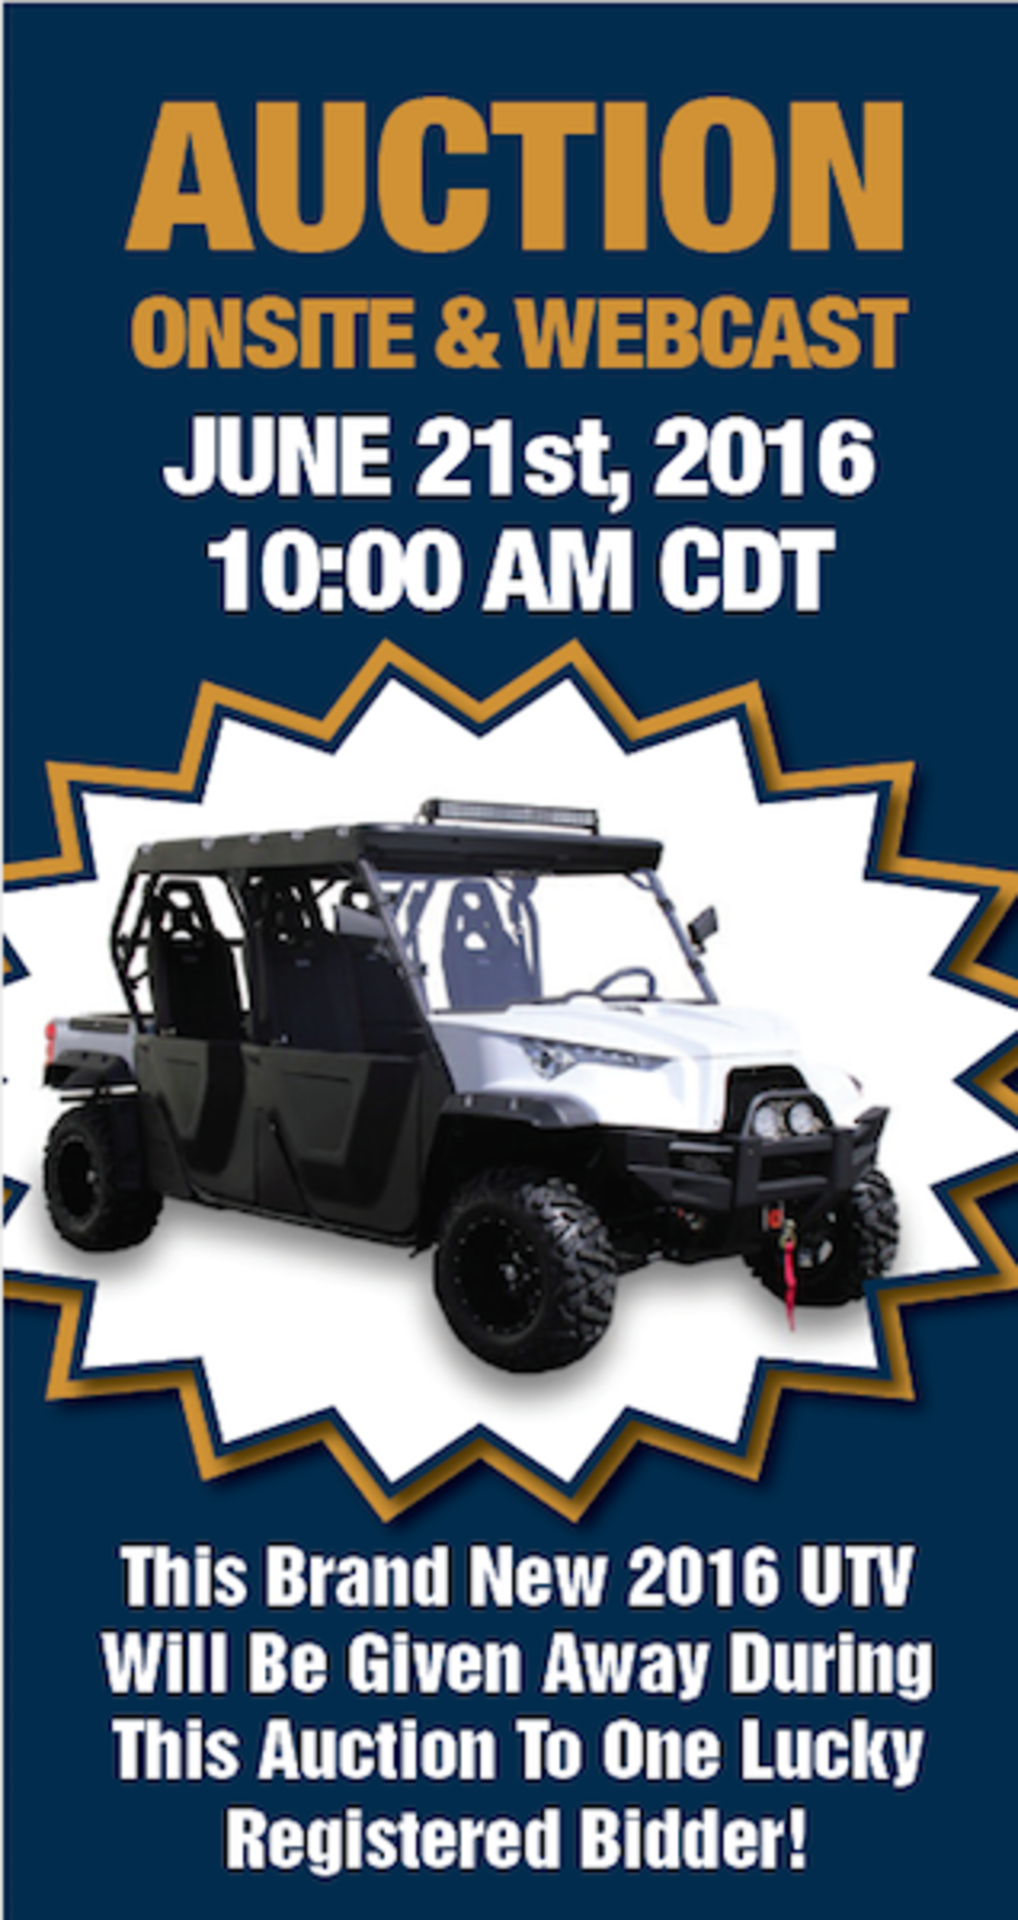 This Brand New 2016 UTV Will Be Given Away During This Auction To One Lucky Registered Bidder!